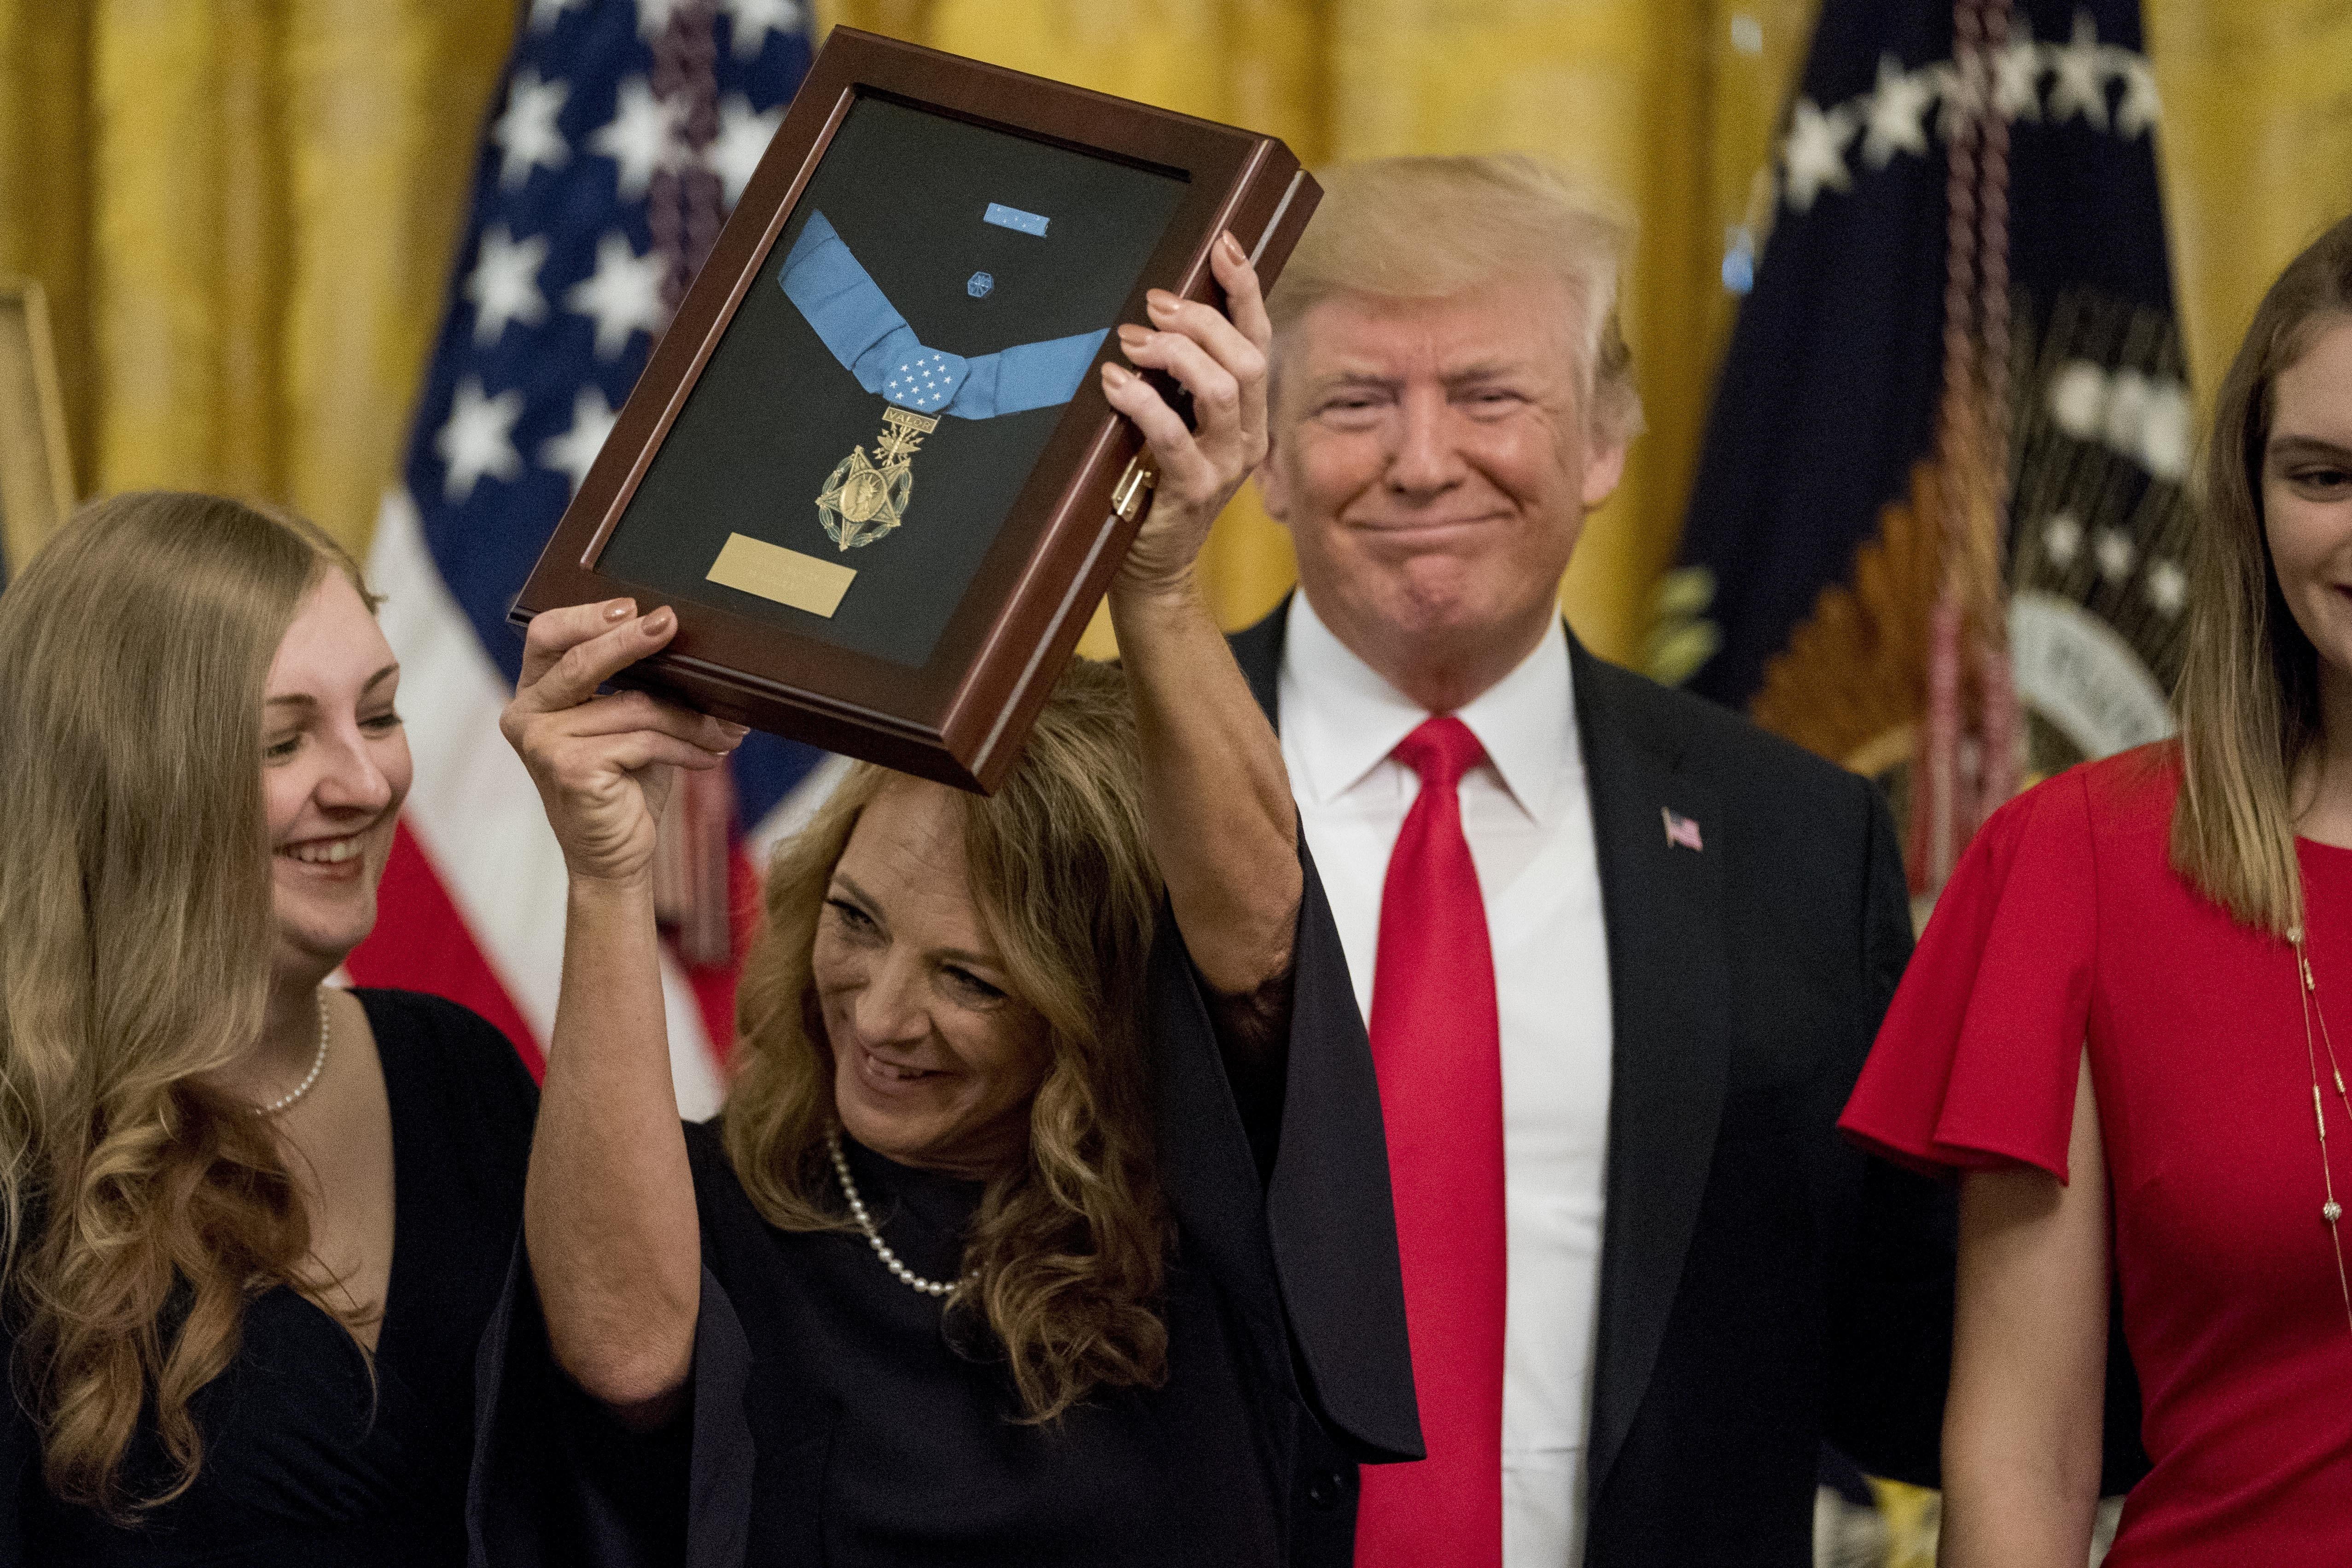 Valerie Nessel, second from left, accompanied by family members, accepts the Medal of Honor from President Donald Trump, second from right, for her husband Air Force Tech. Sgt. John A. Chapman, posthumously for conspicuous gallantry during a ceremony in the East Room of the White House in Washington on Wednesday.